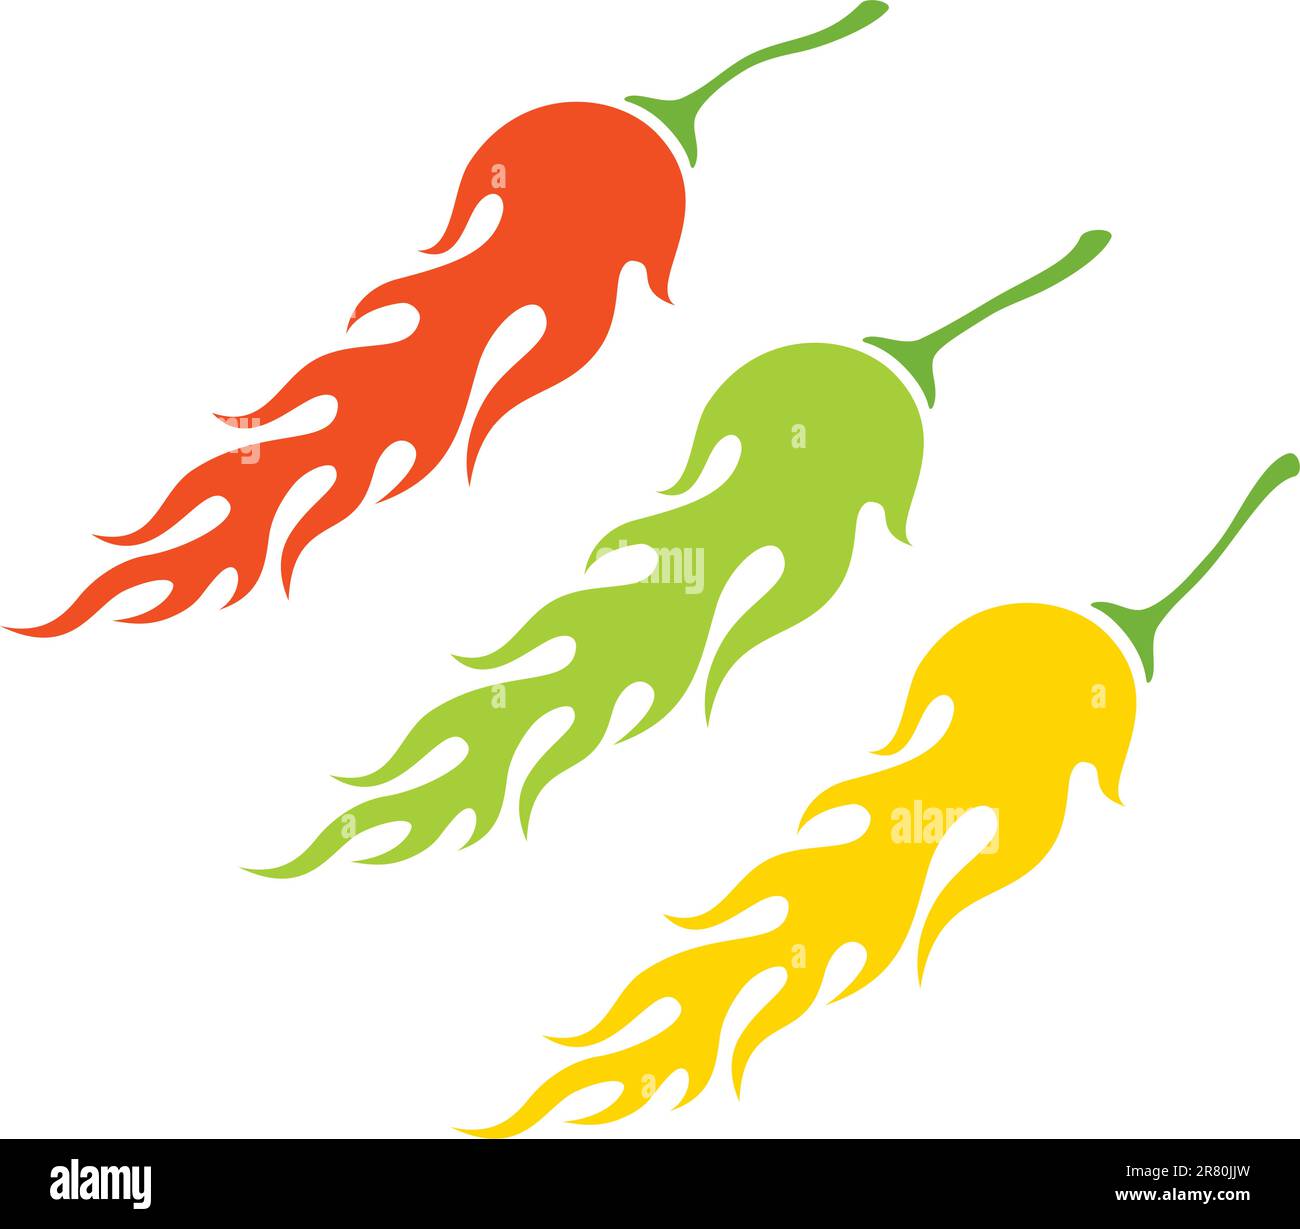 Illustration of the three kinds of peppers in the form of a flame Stock Vector